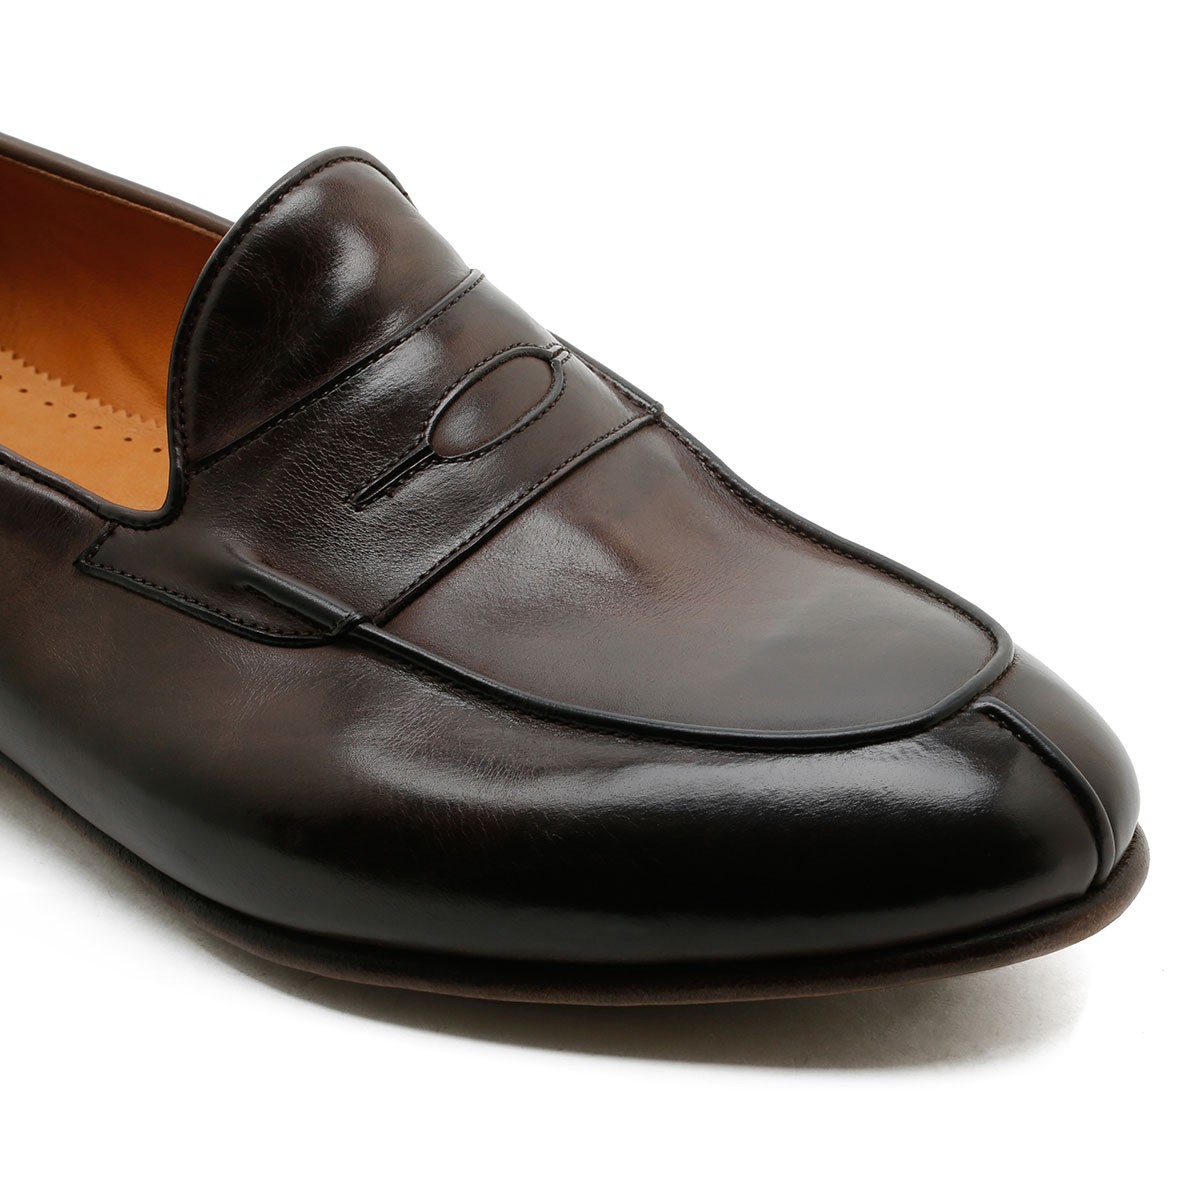 Dark brown leather loafers